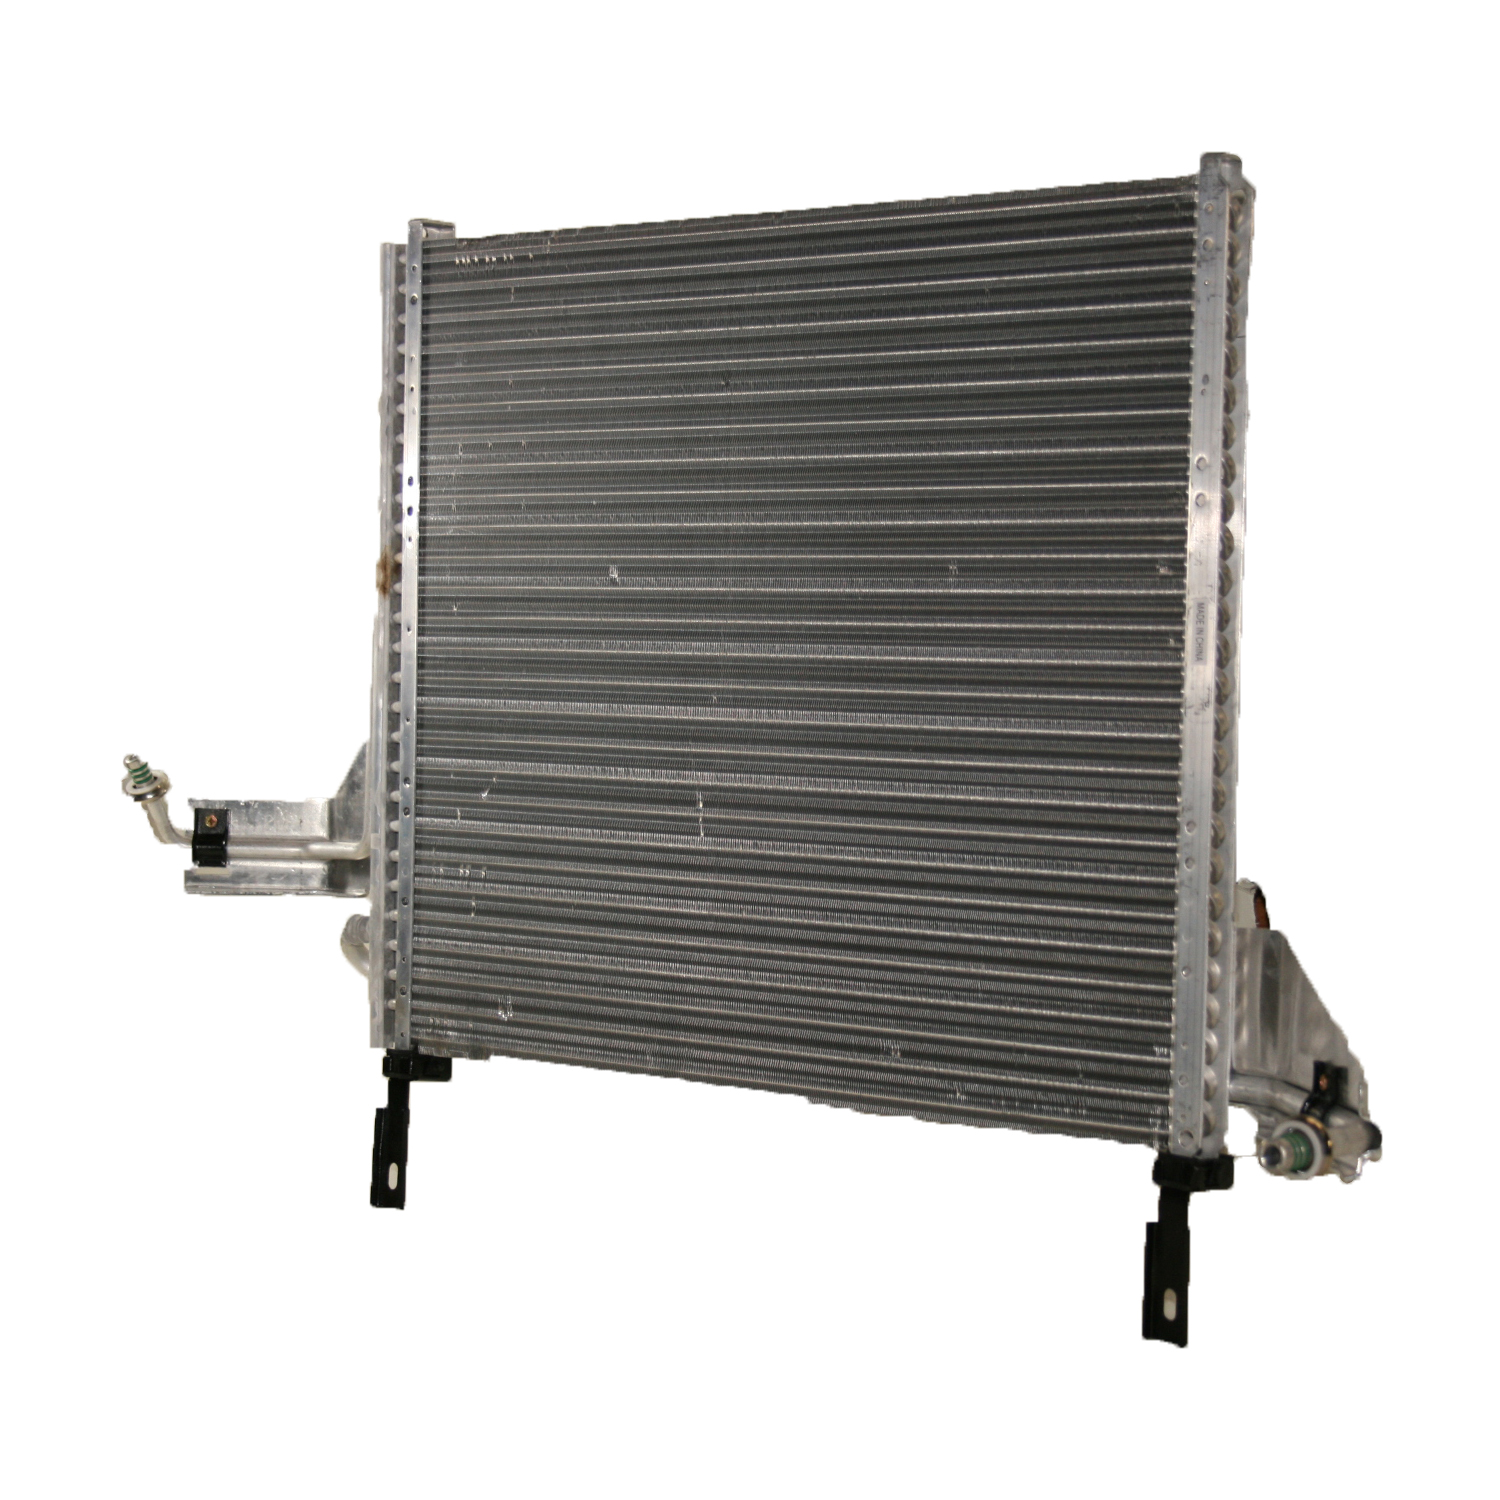 TCW Condenser 44-4627 New Product Image field_60b6a13a6e67c